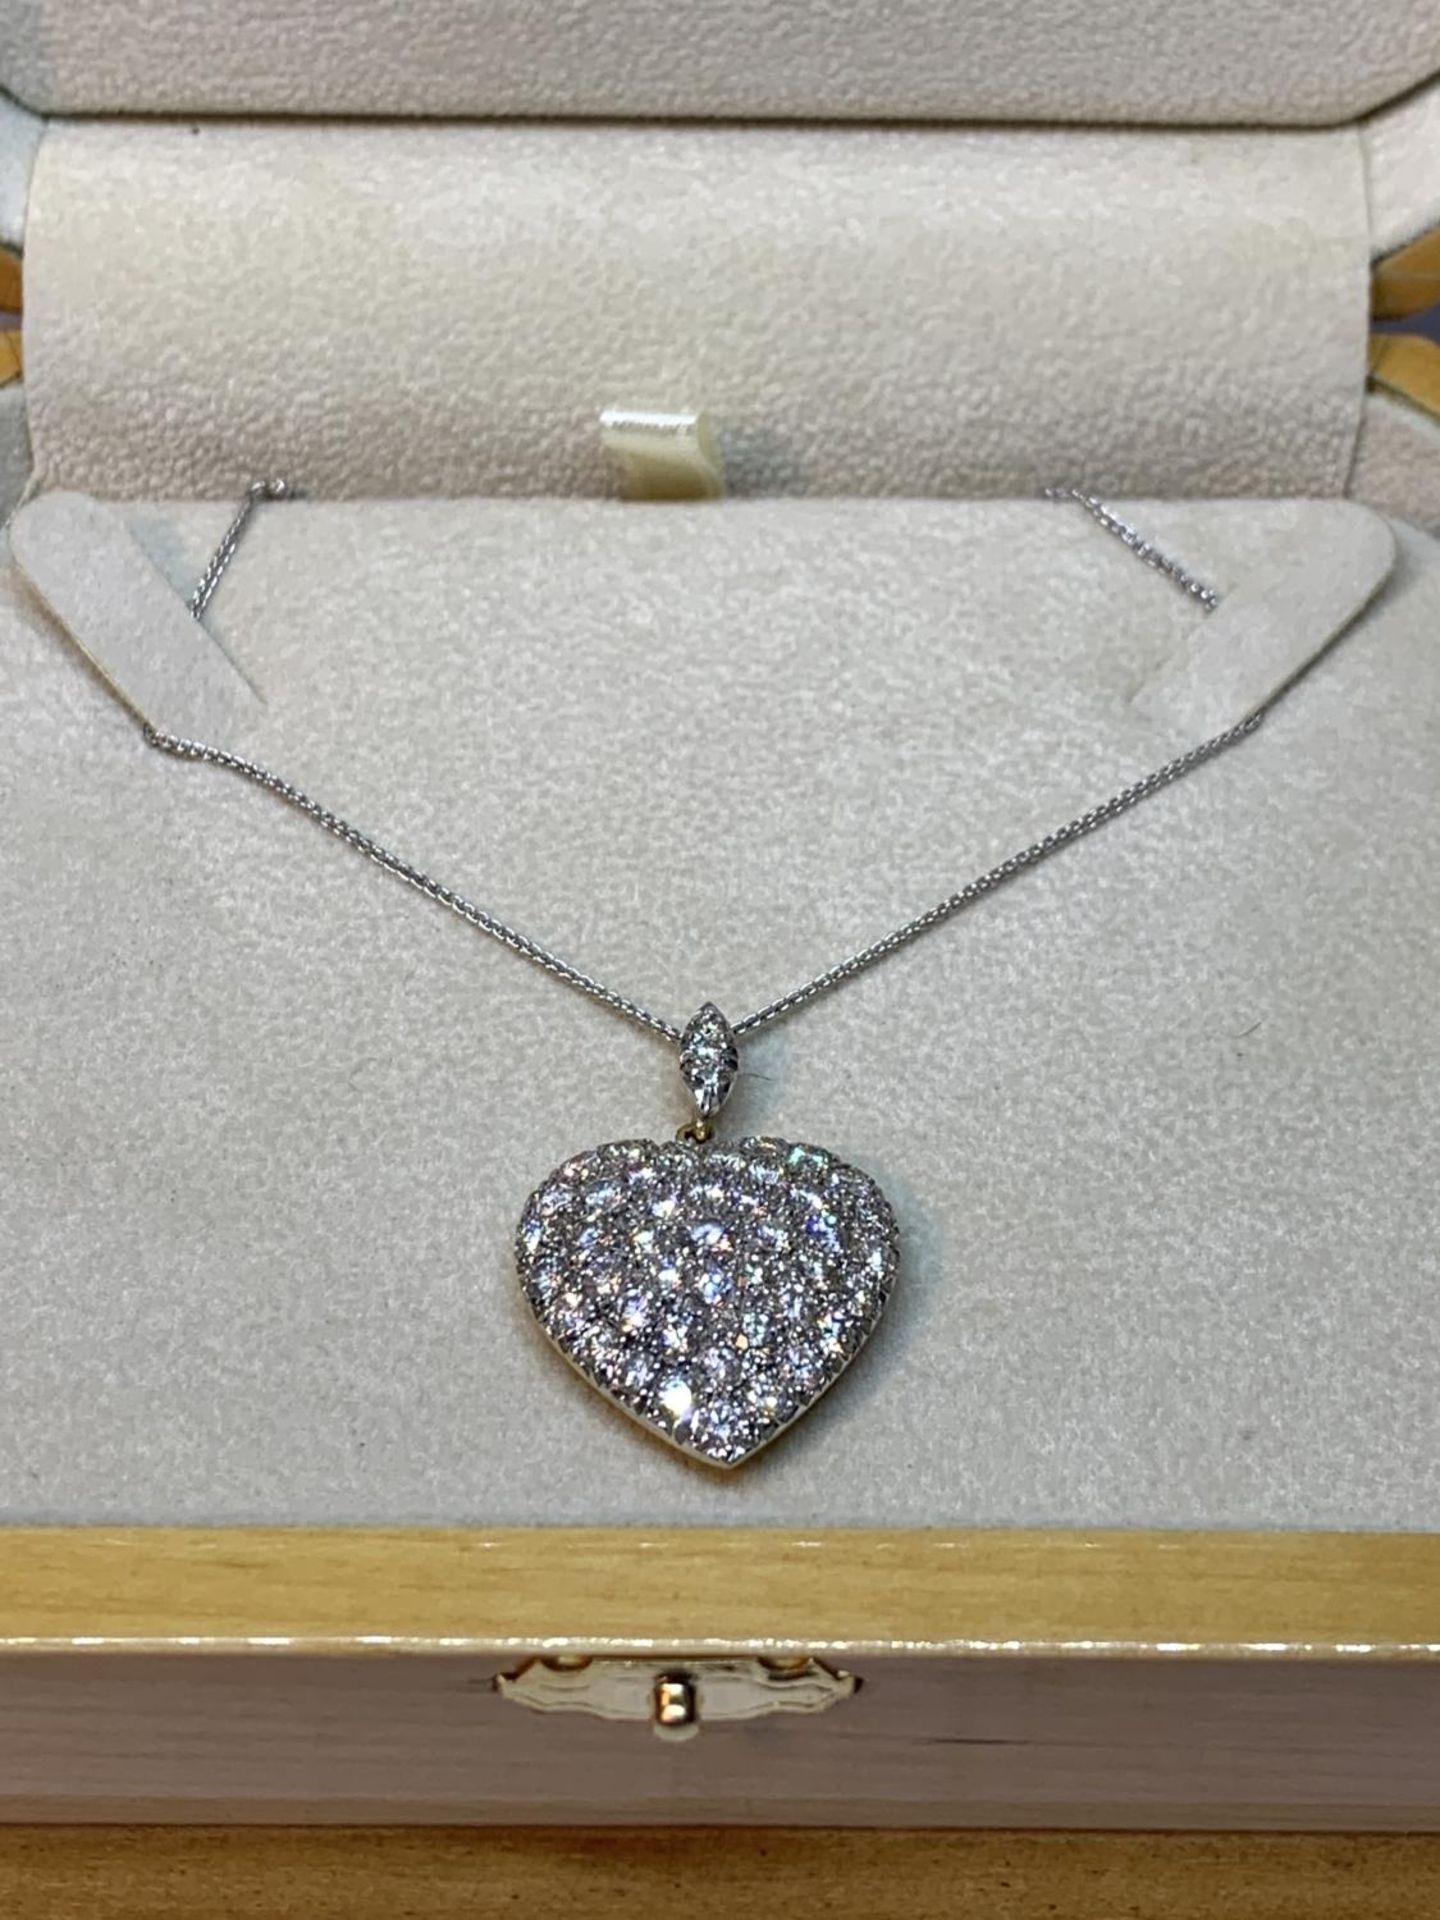 A 15 CARAT WHITE AND YELLOW GOLD LARGE DIAMOND ENCRUSTED HEART PENDANT WITH CHAIN LENGTH 44CM IN A - Image 2 of 8